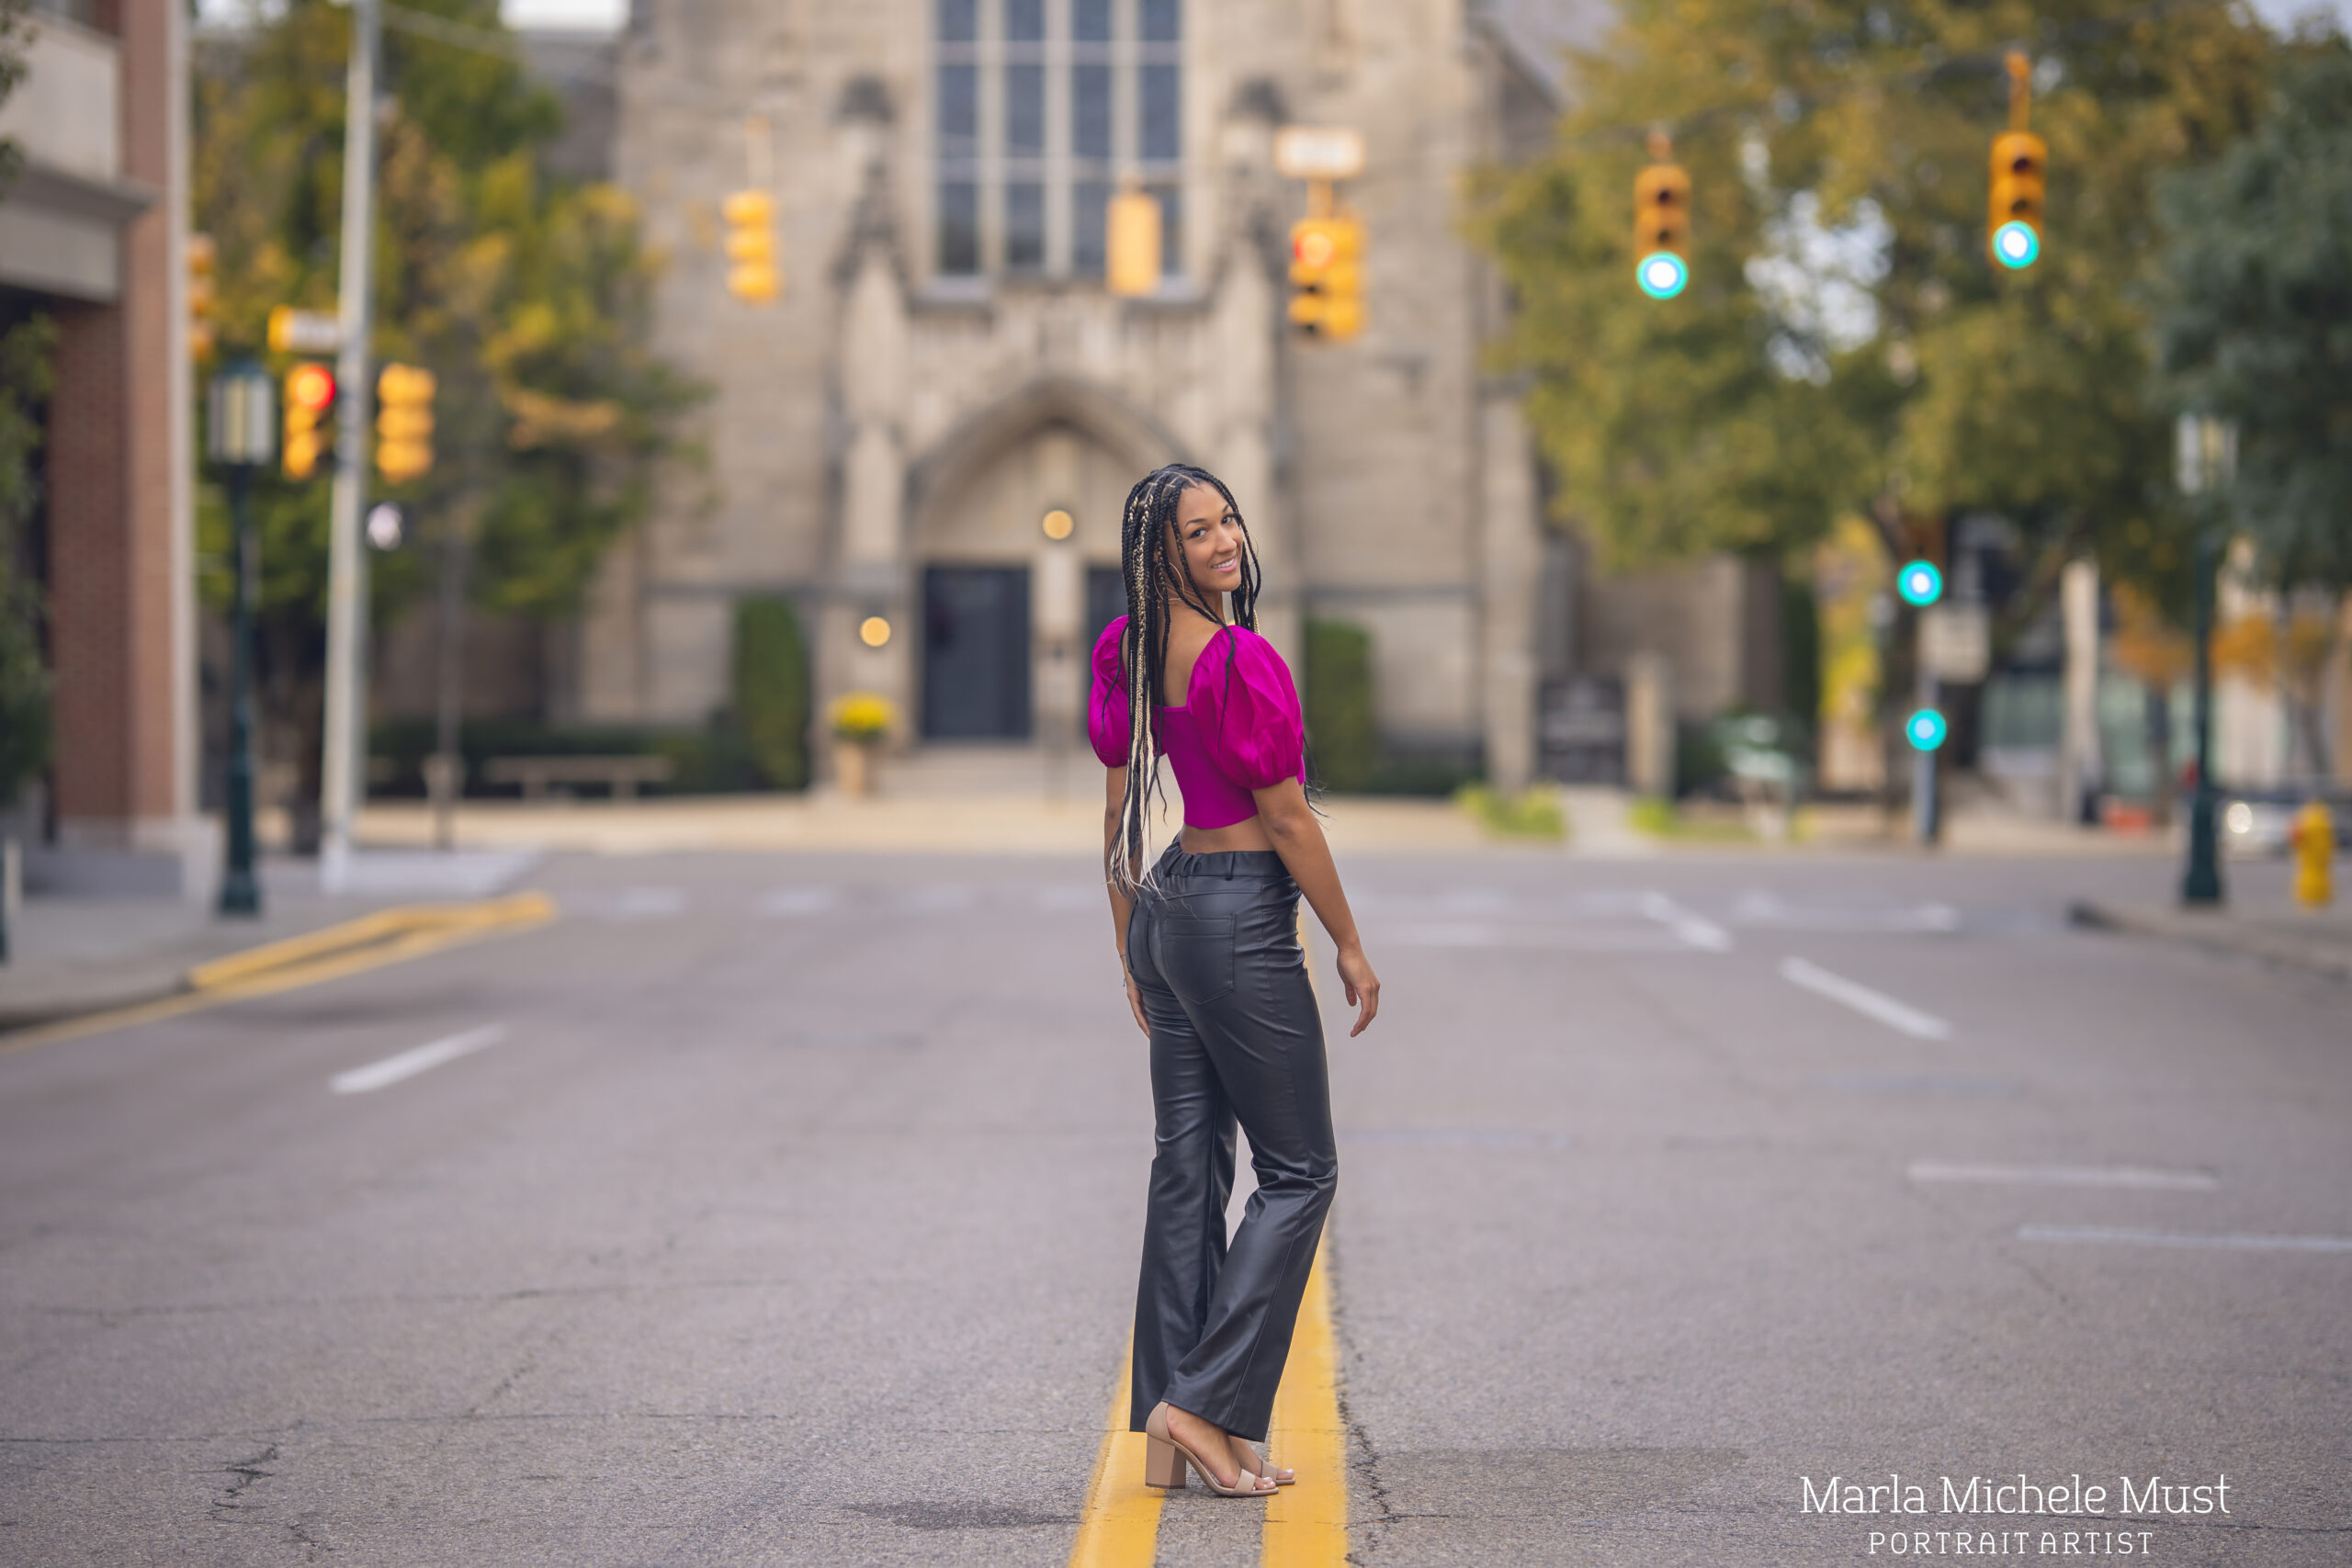 A young woman poses for her senior portrait photoshoot in the street of a downtown Metro in front of a church